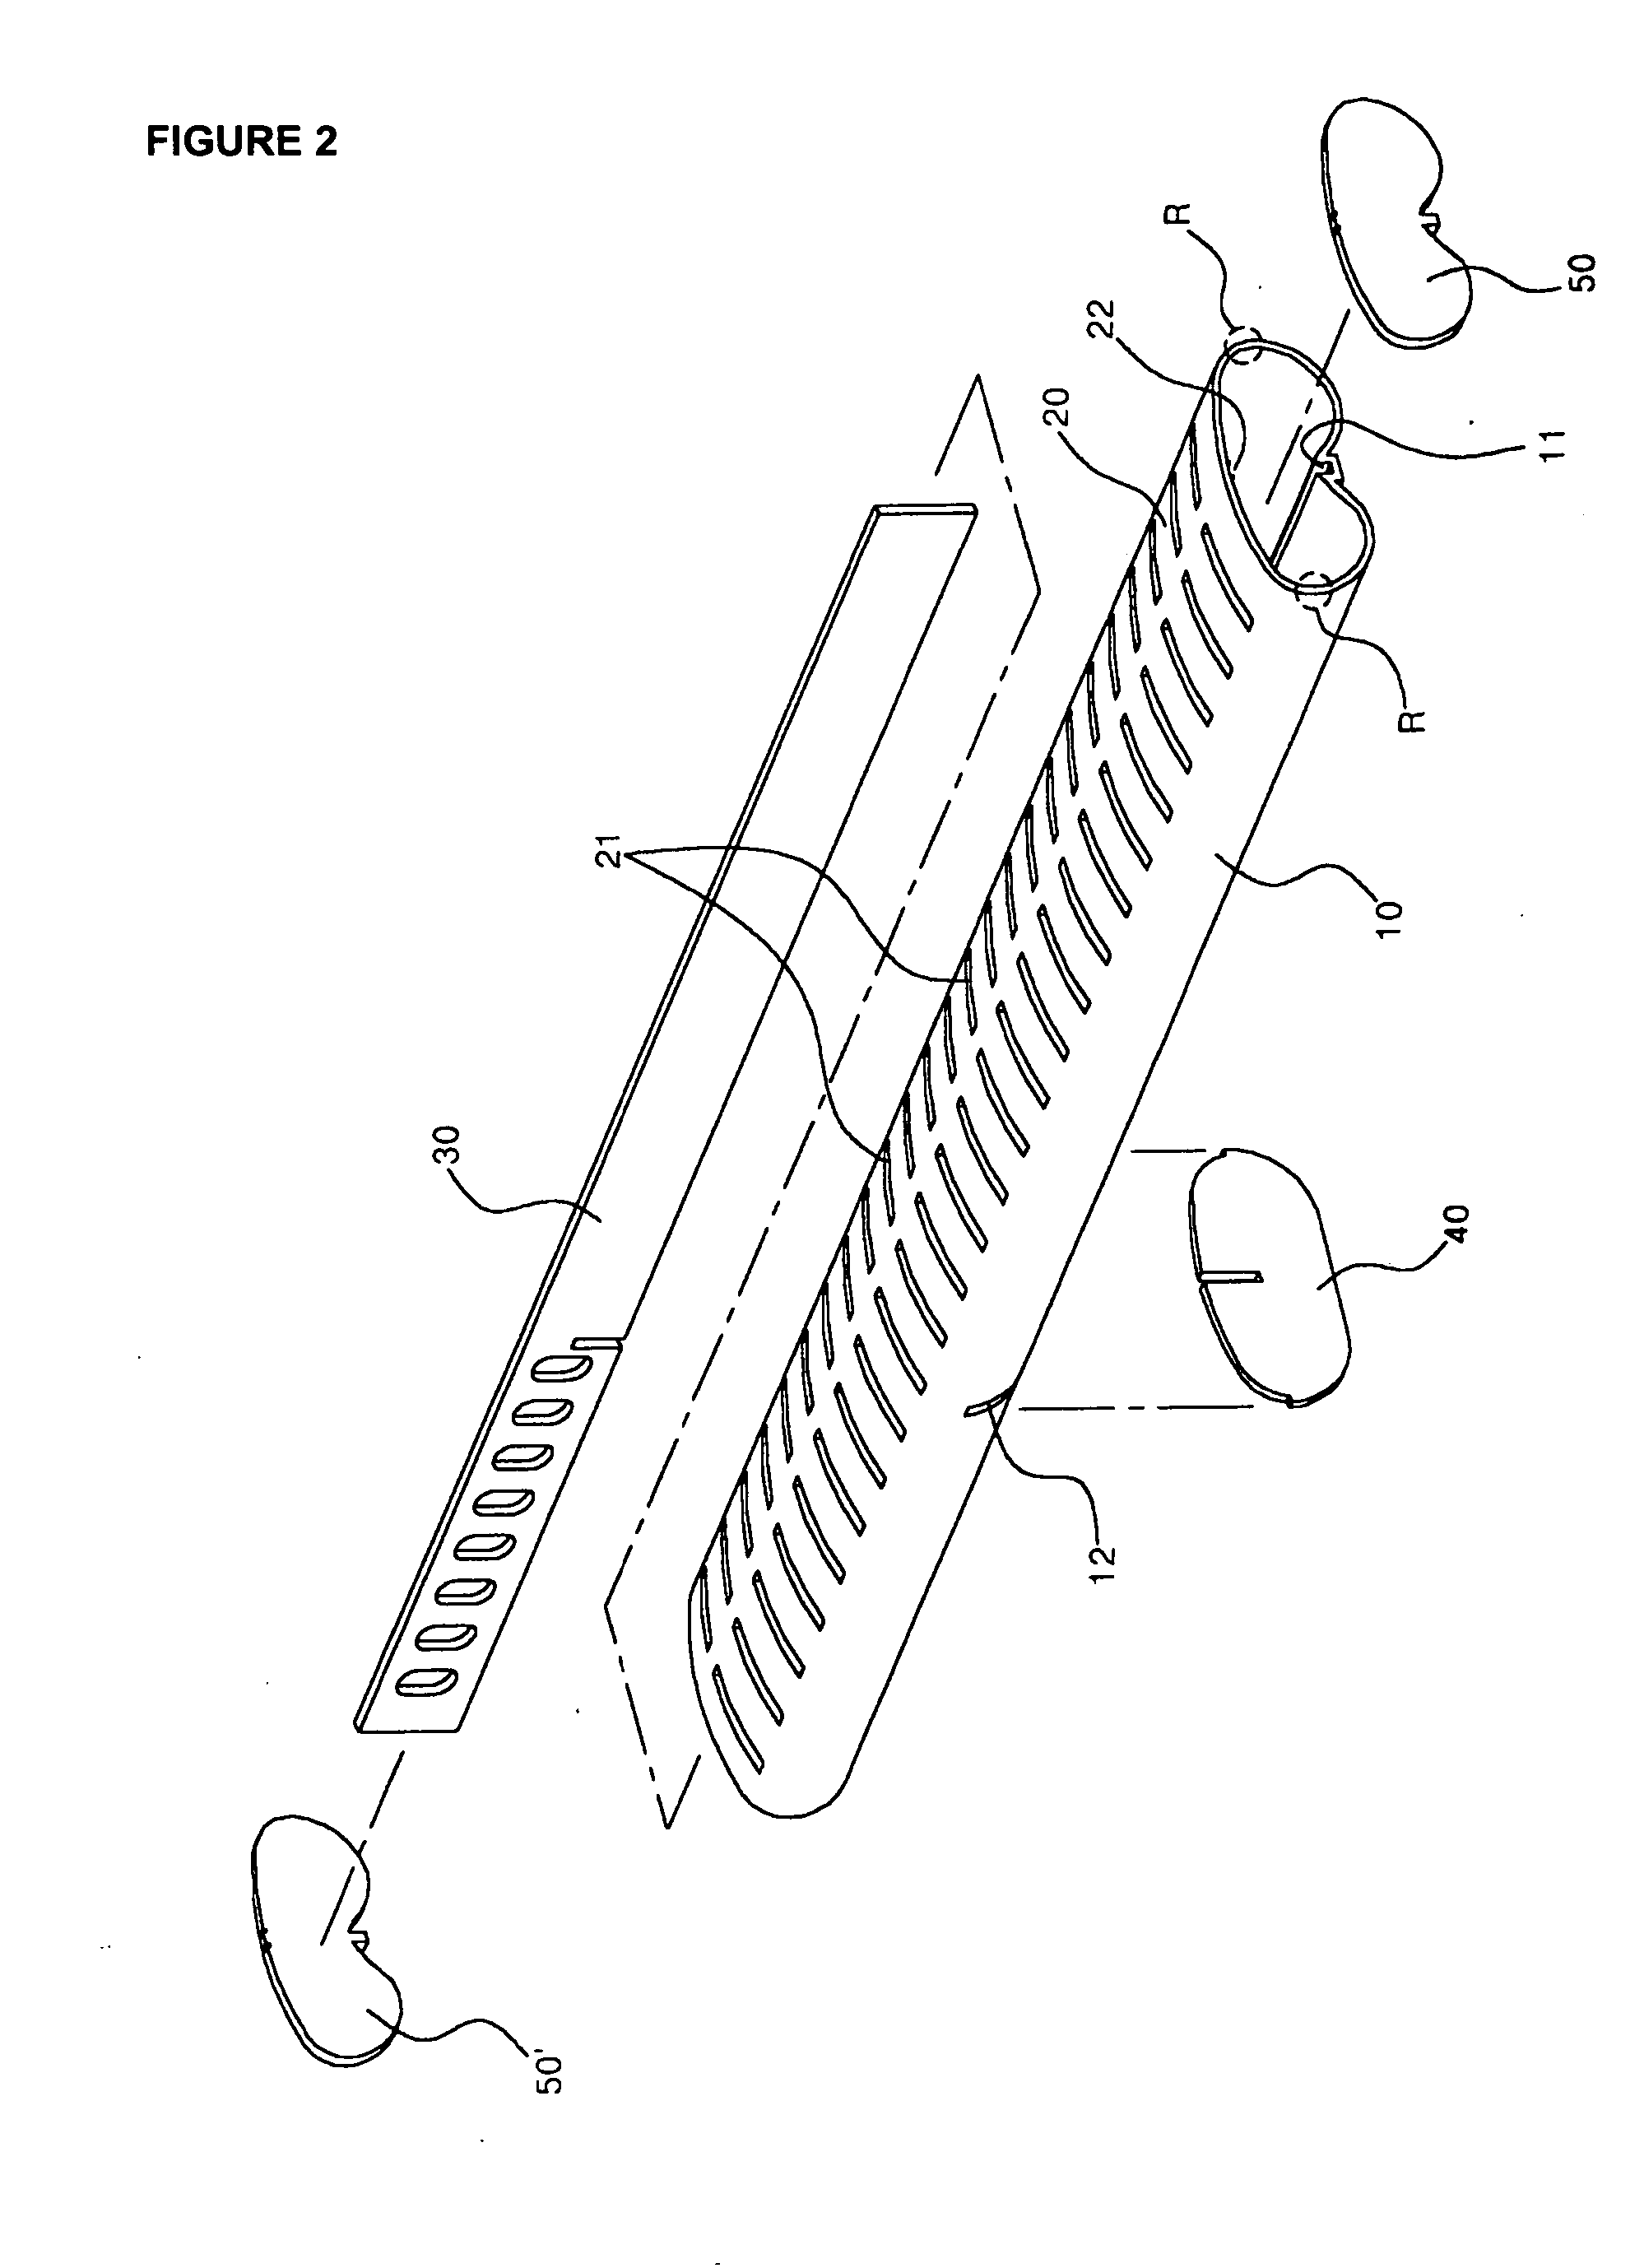 Header pipe evaporator for use in an automobile